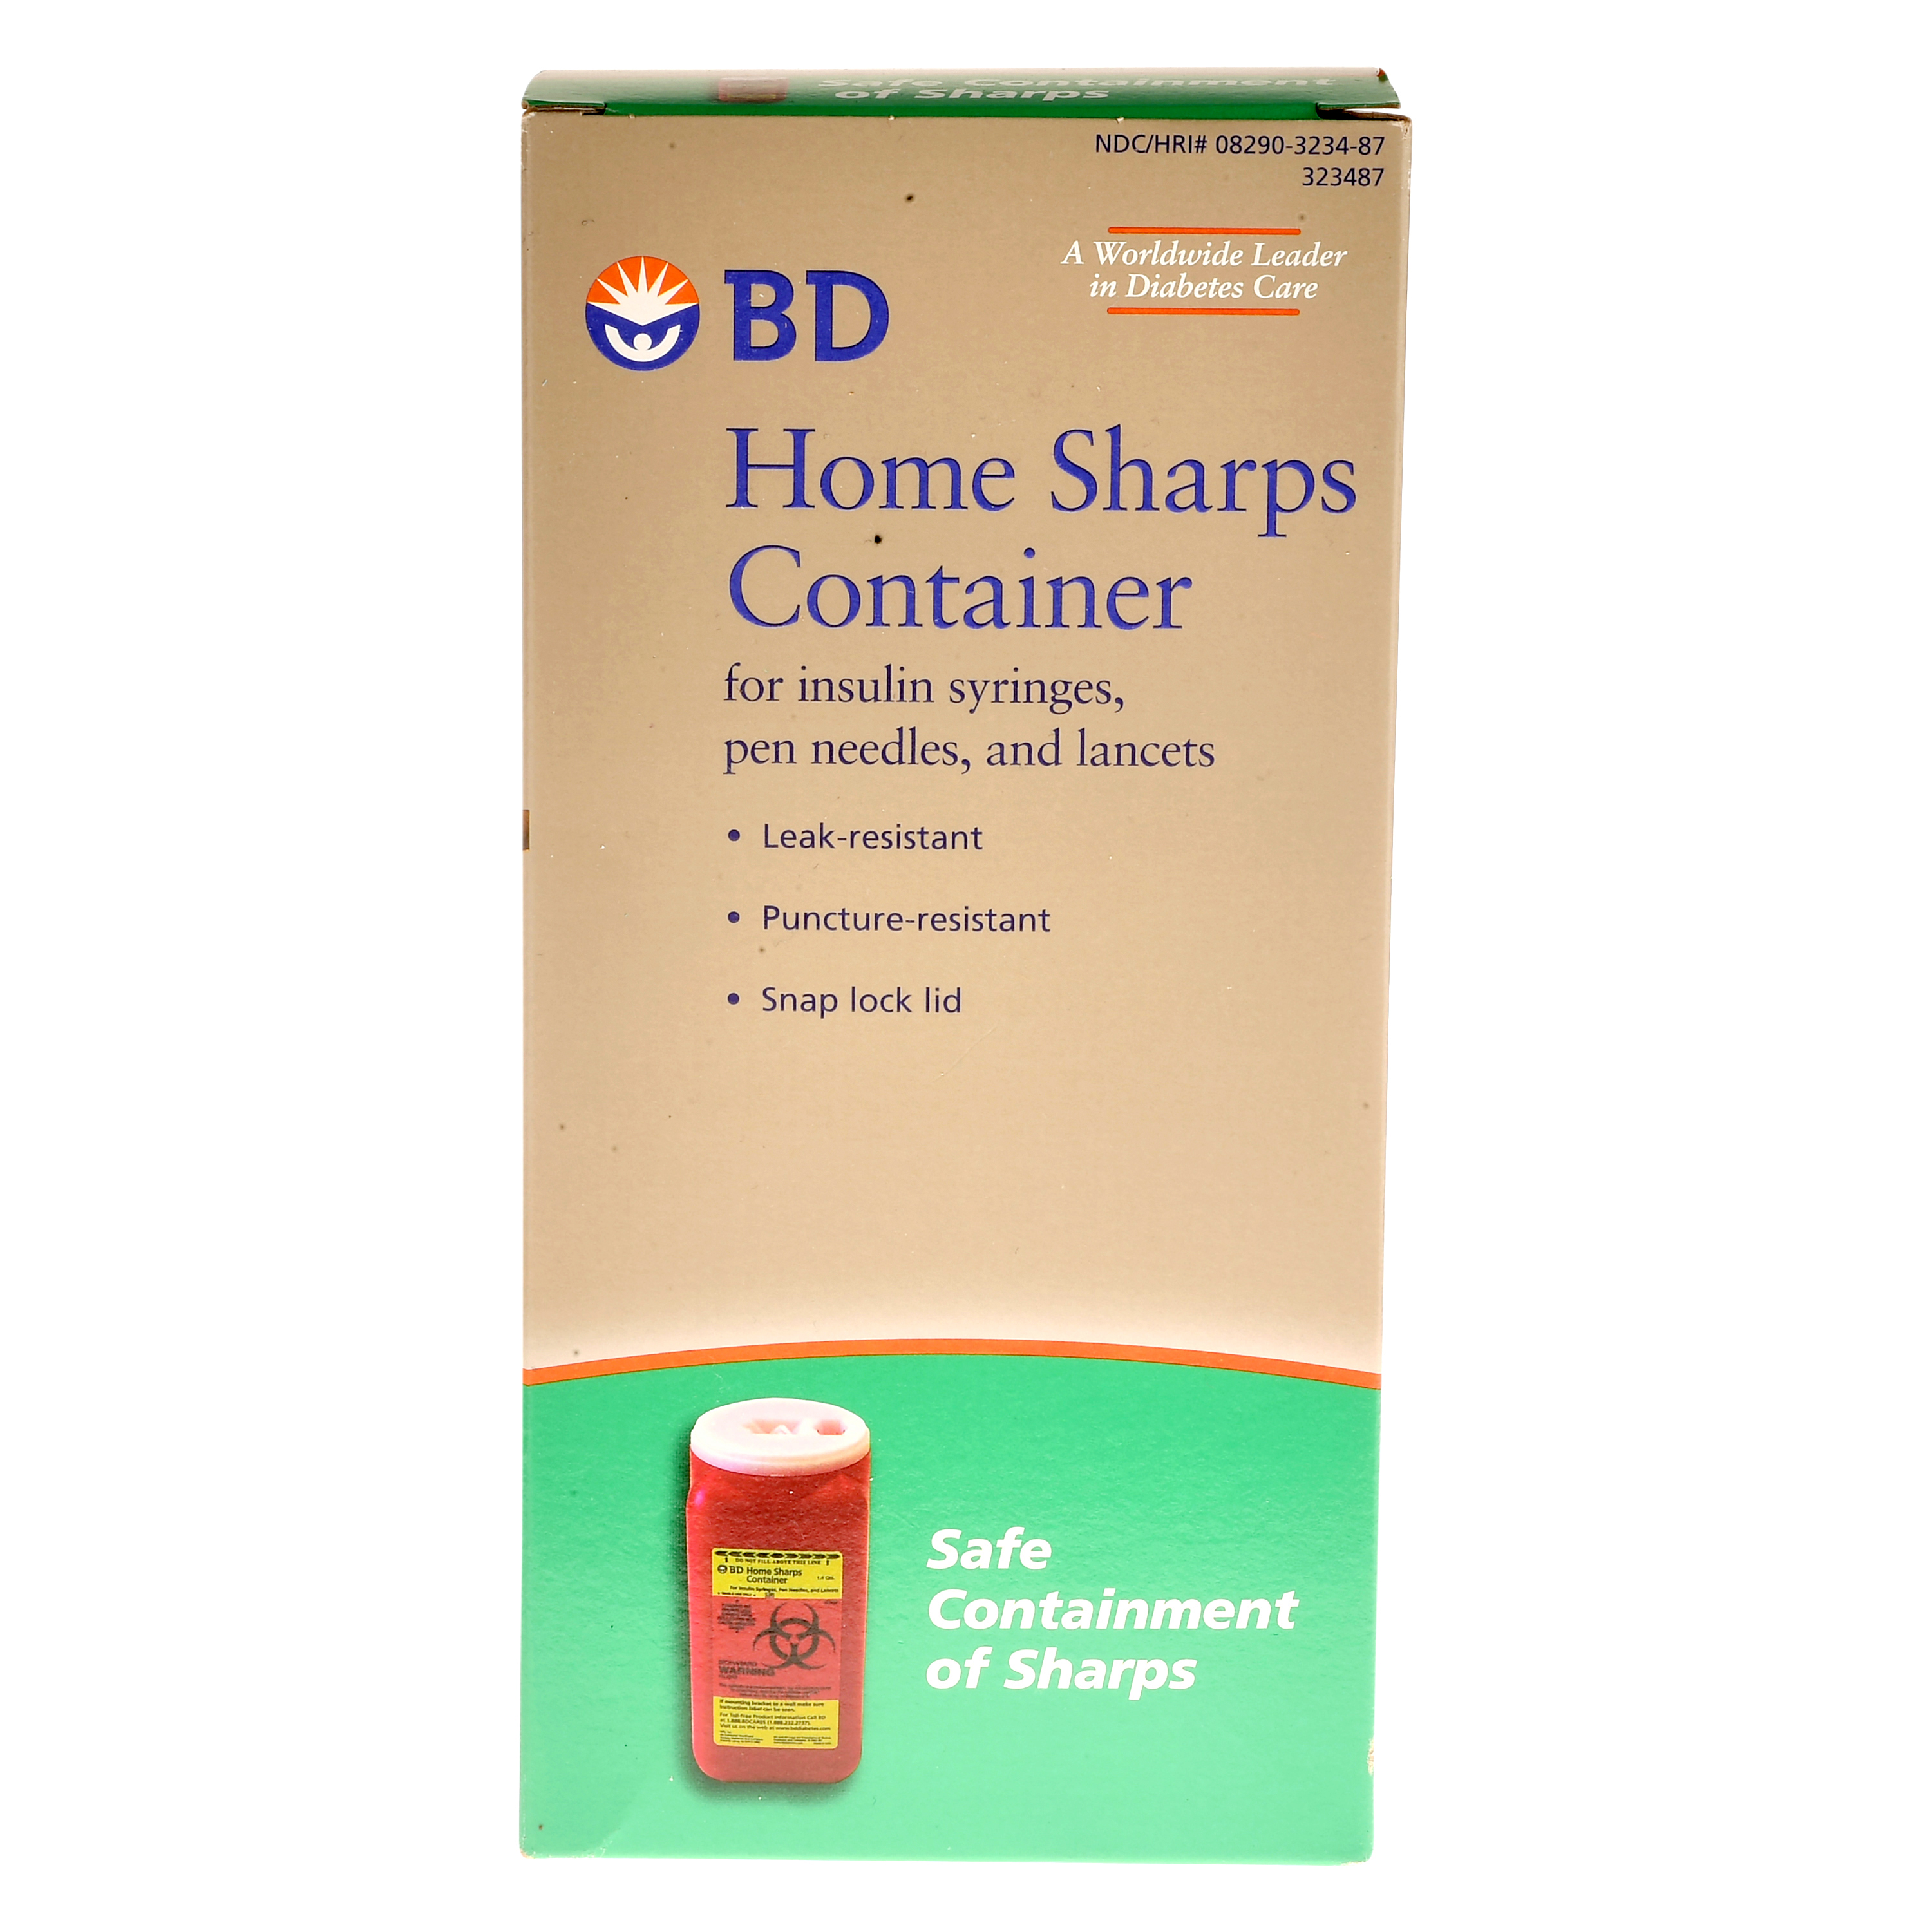 BD Home Sharps Container - image 1 of 5